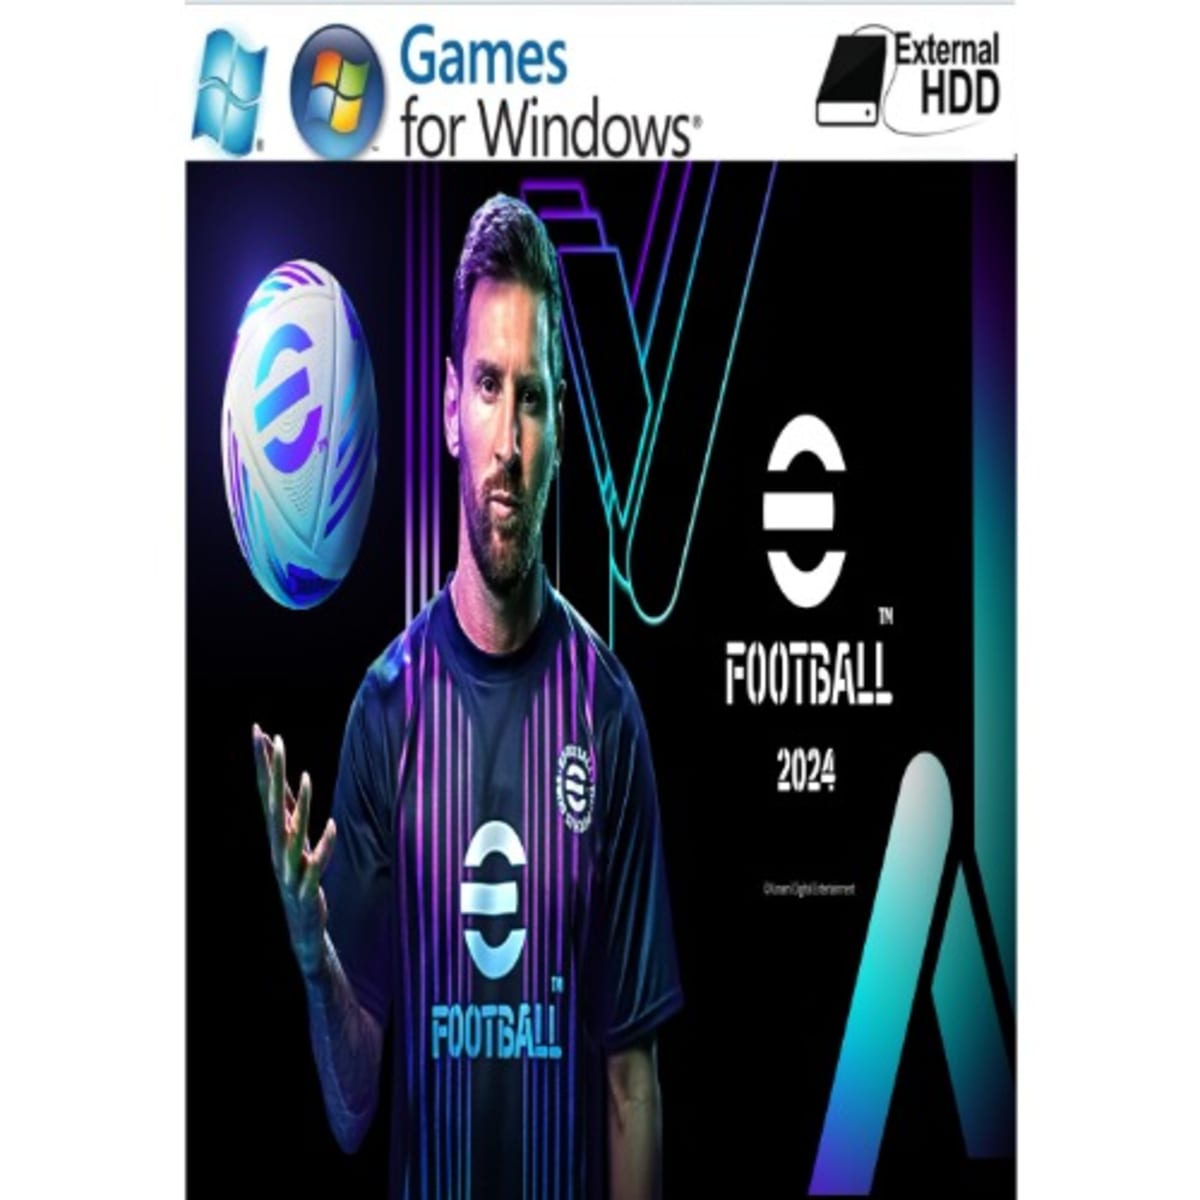 Efootball 2023 EPES 23 - PES 2023 - PC Game + Flash Drive + Free Gifts